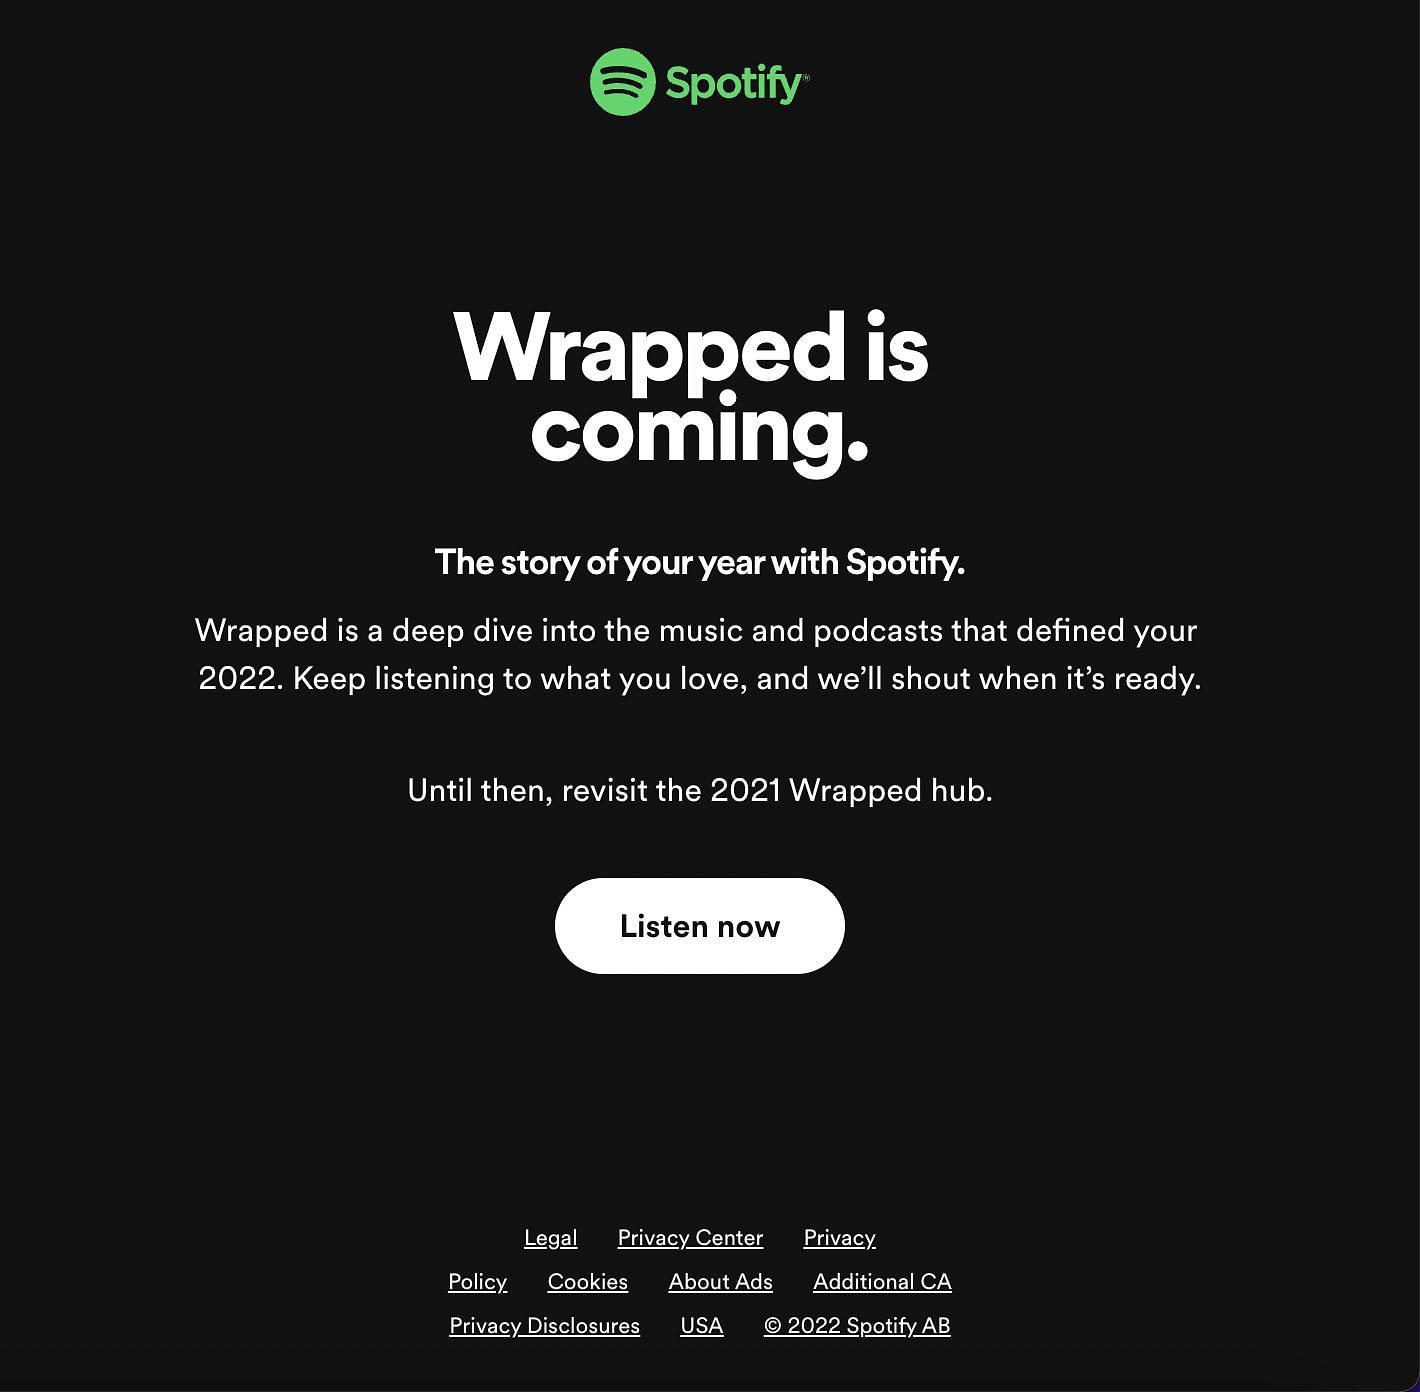 The company released a statement claiming the release of Wrapped 2022, however, they did not spill the release date. (image via Spotify)